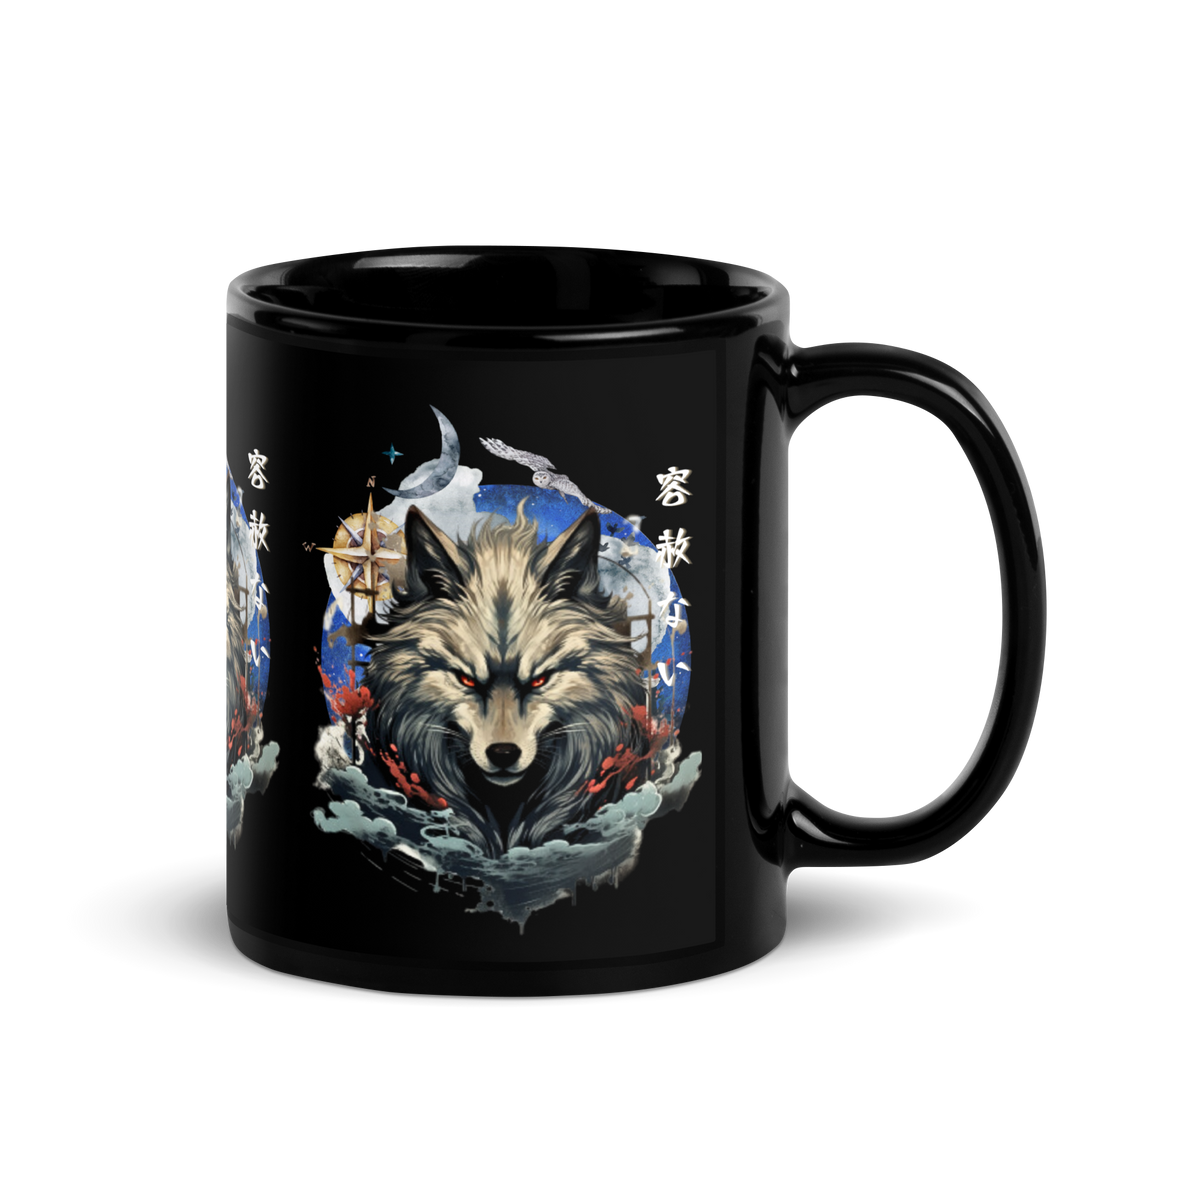 Japanese wolf, Black glossy mug, Wolf print, Coffee mug, Tea cup, Artistic design, Cultural motif, Unique gift, Mug collection, Japanese folklore, Drinkware, Home decor, Kitchen accessories, Animal art, Traditional symbolism, Modern aesthetics, High-quality print, Collectible item, Office essentials, Trendy merchandise, Online store, Puerto Rico entrepreneur